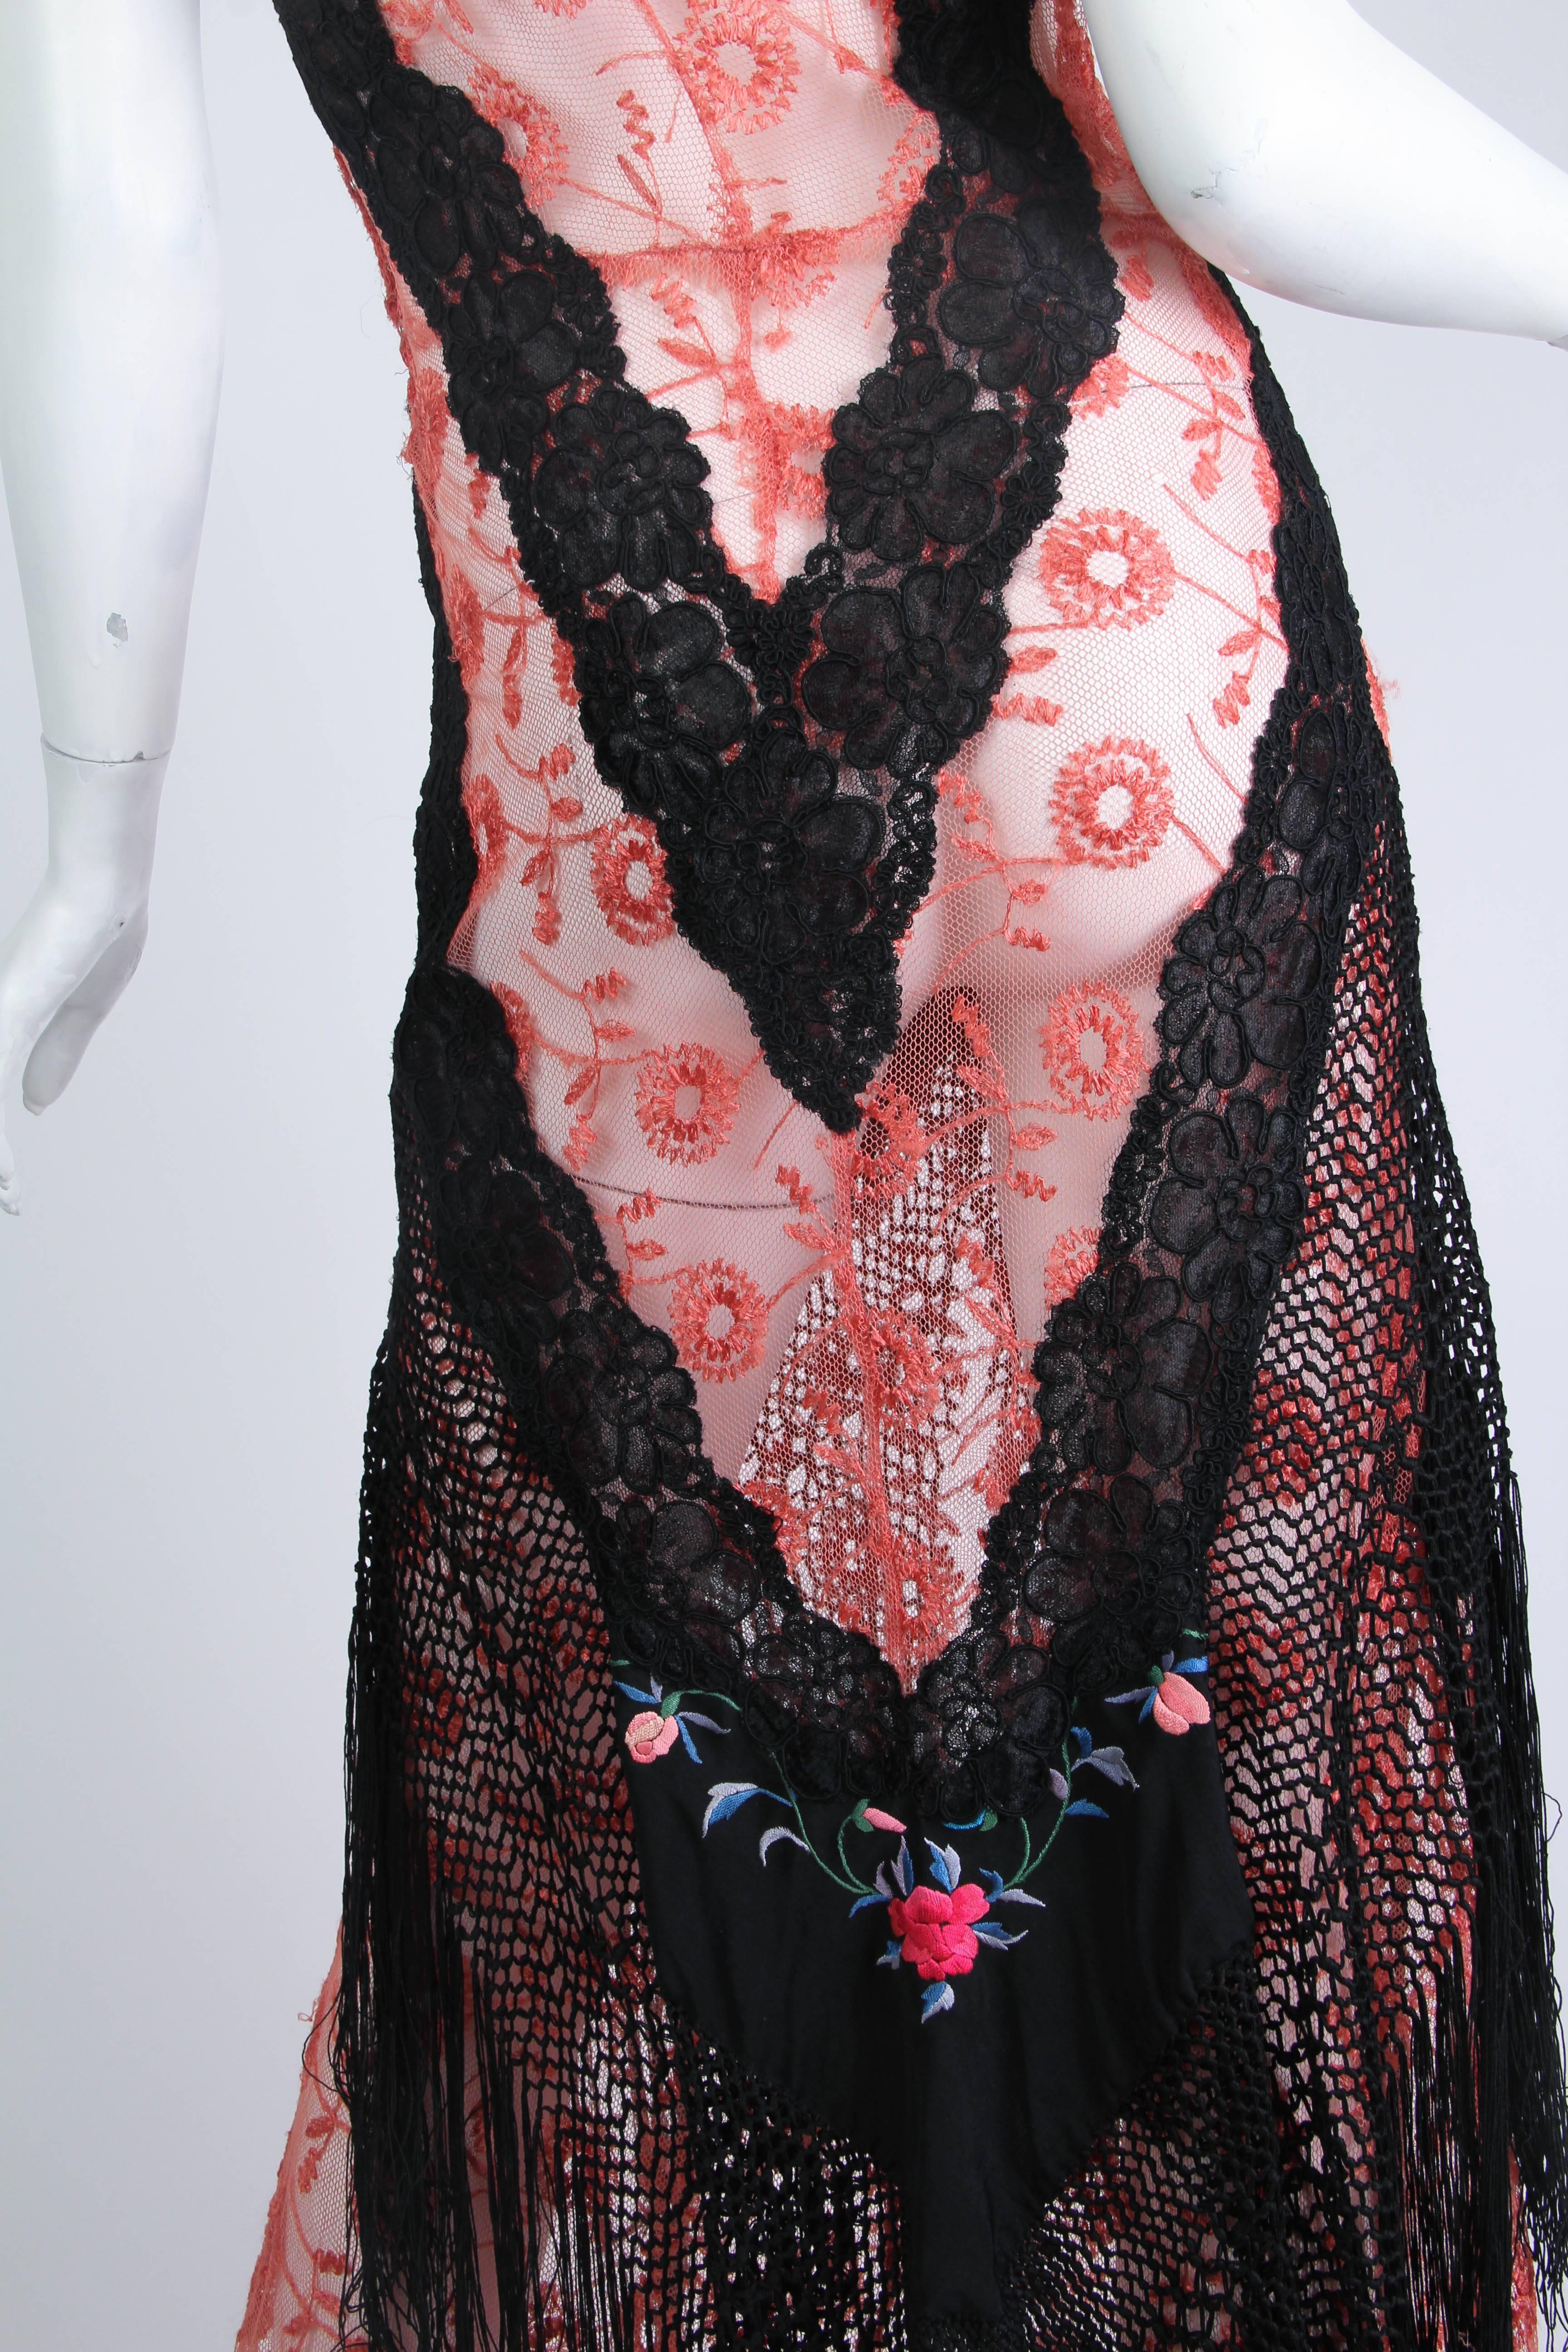 1930s Bias Cut Silk Net Lace Dress Re-Built with Chinese Embroidery and Fringe 3